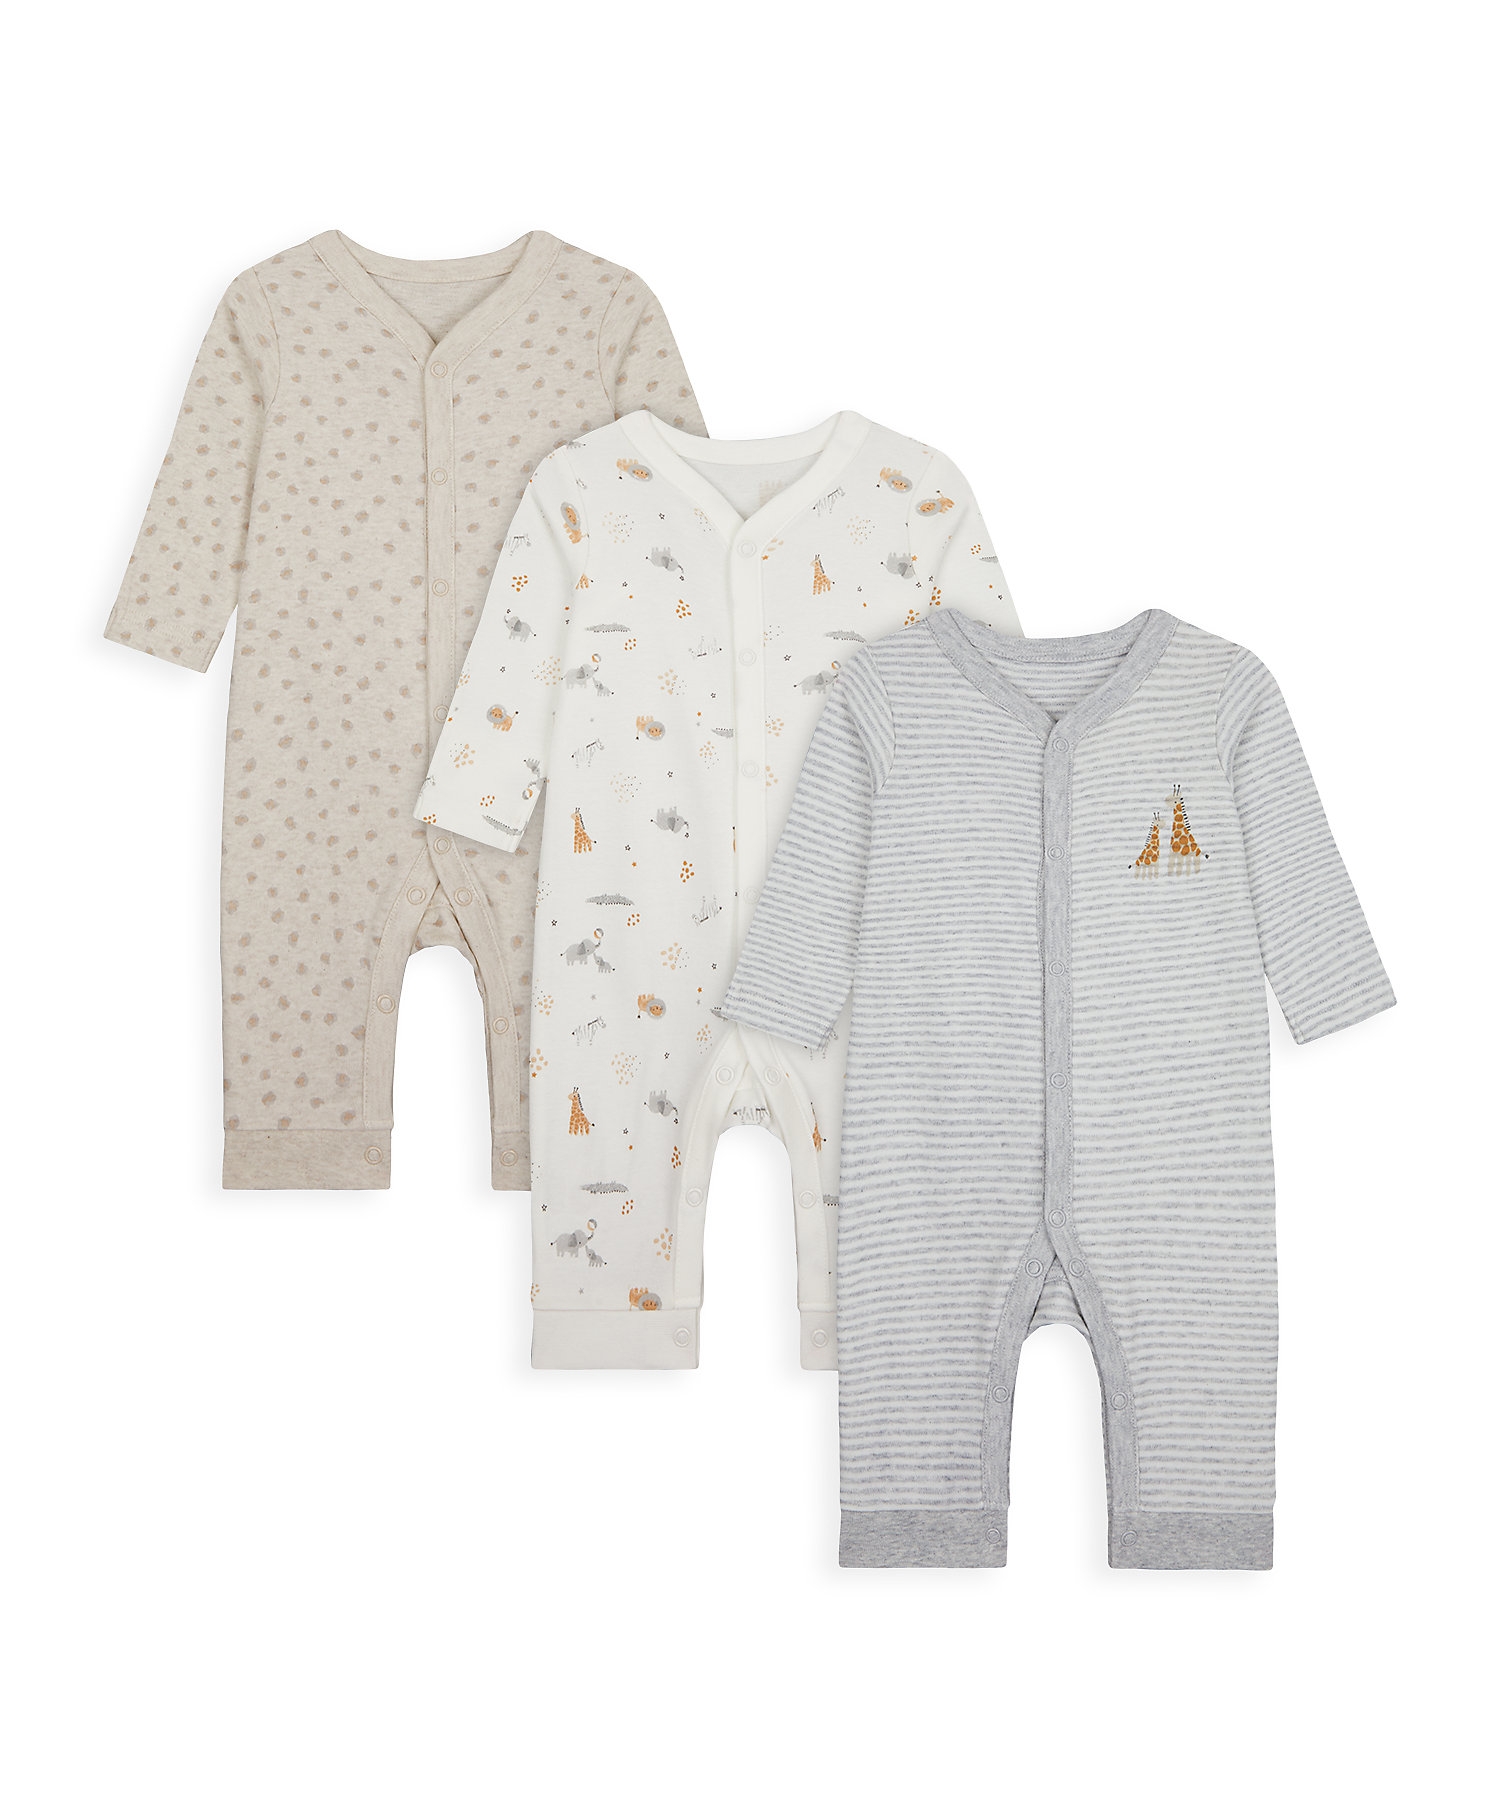 Mothercare | Unisex Full Sleeves Sleepsuit Printed And Striped - Pack Of 3 - Beige Grey